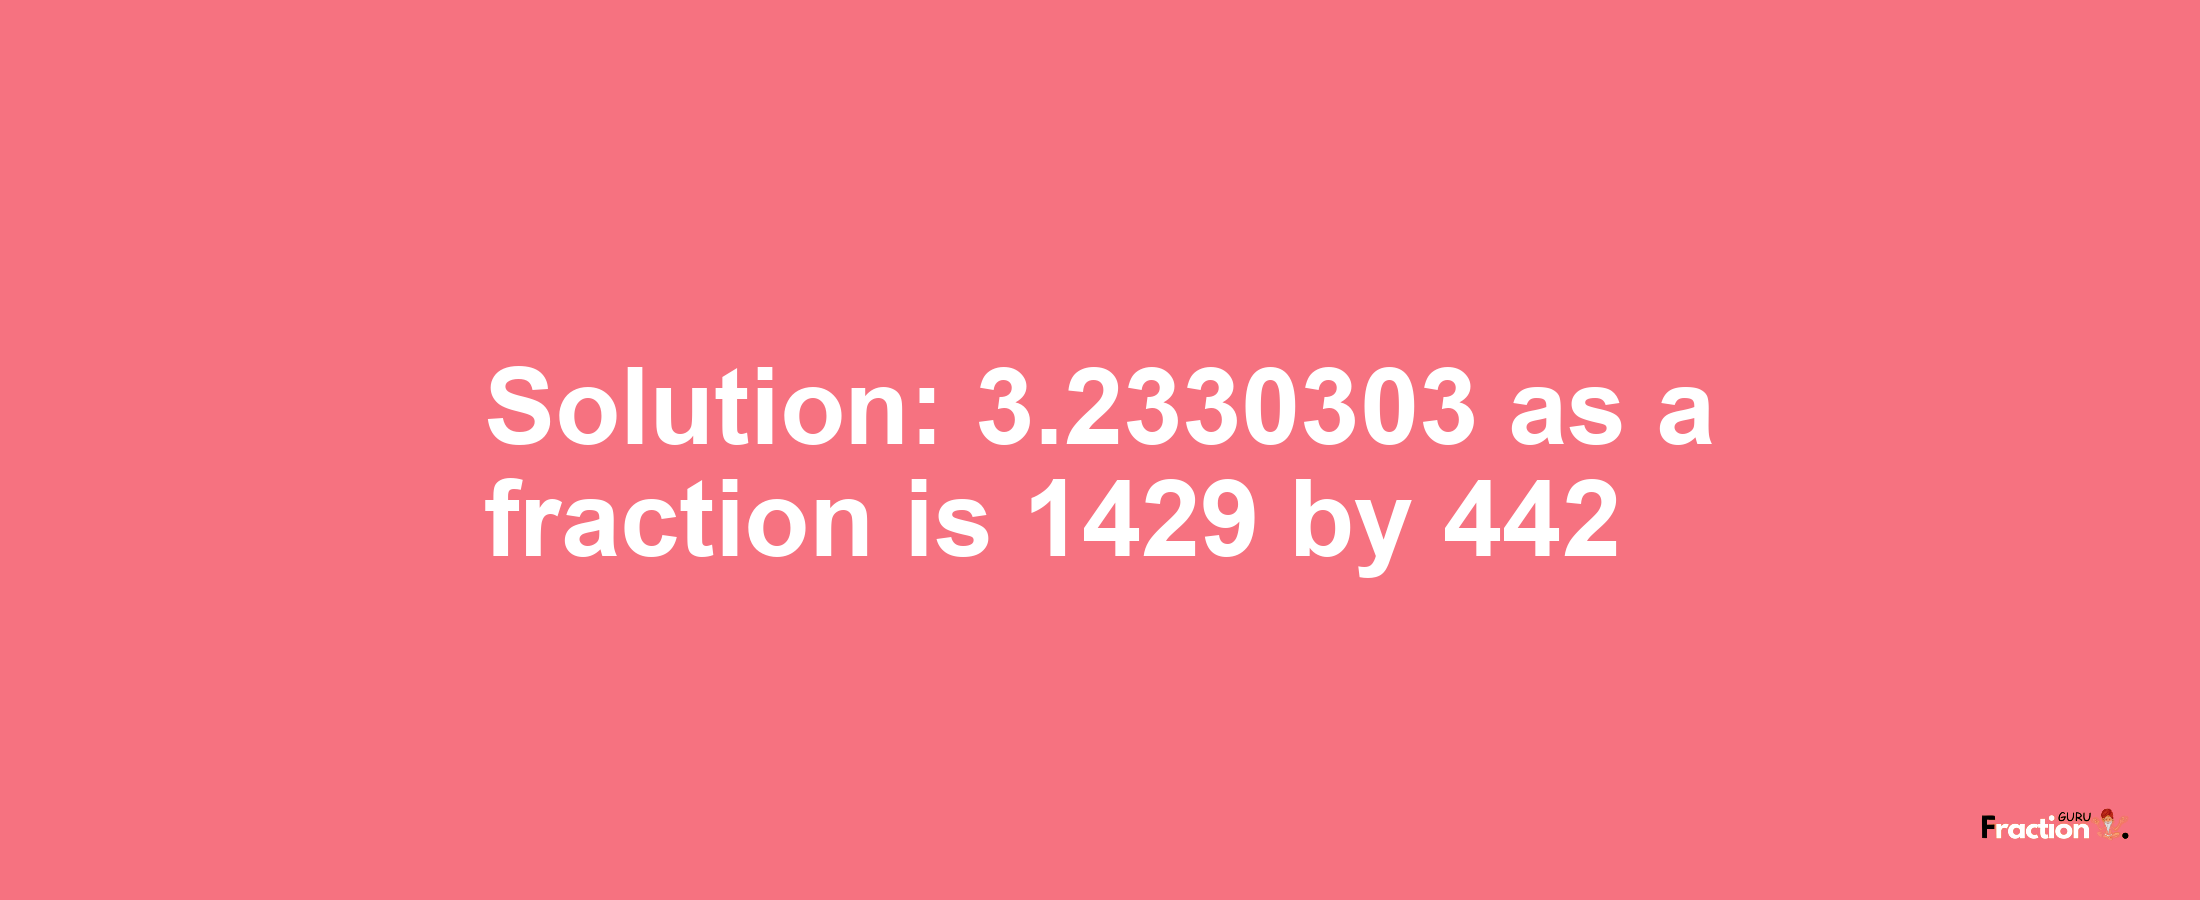 Solution:3.2330303 as a fraction is 1429/442